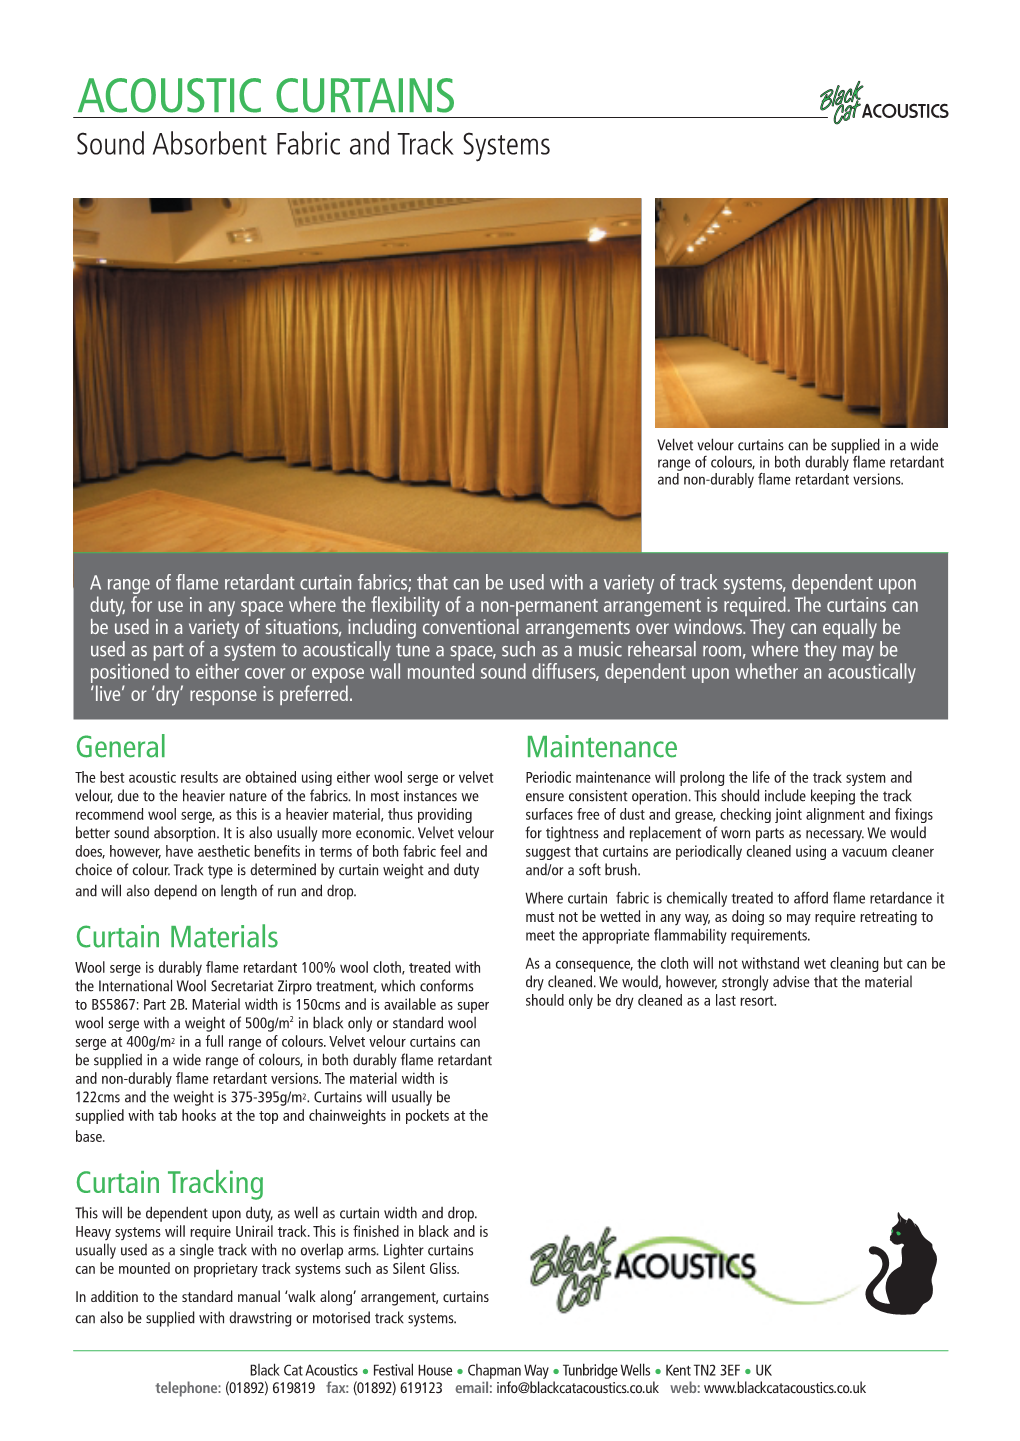 ACOUSTIC CURTAINS Sound Absorbent Fabric and Track Systems